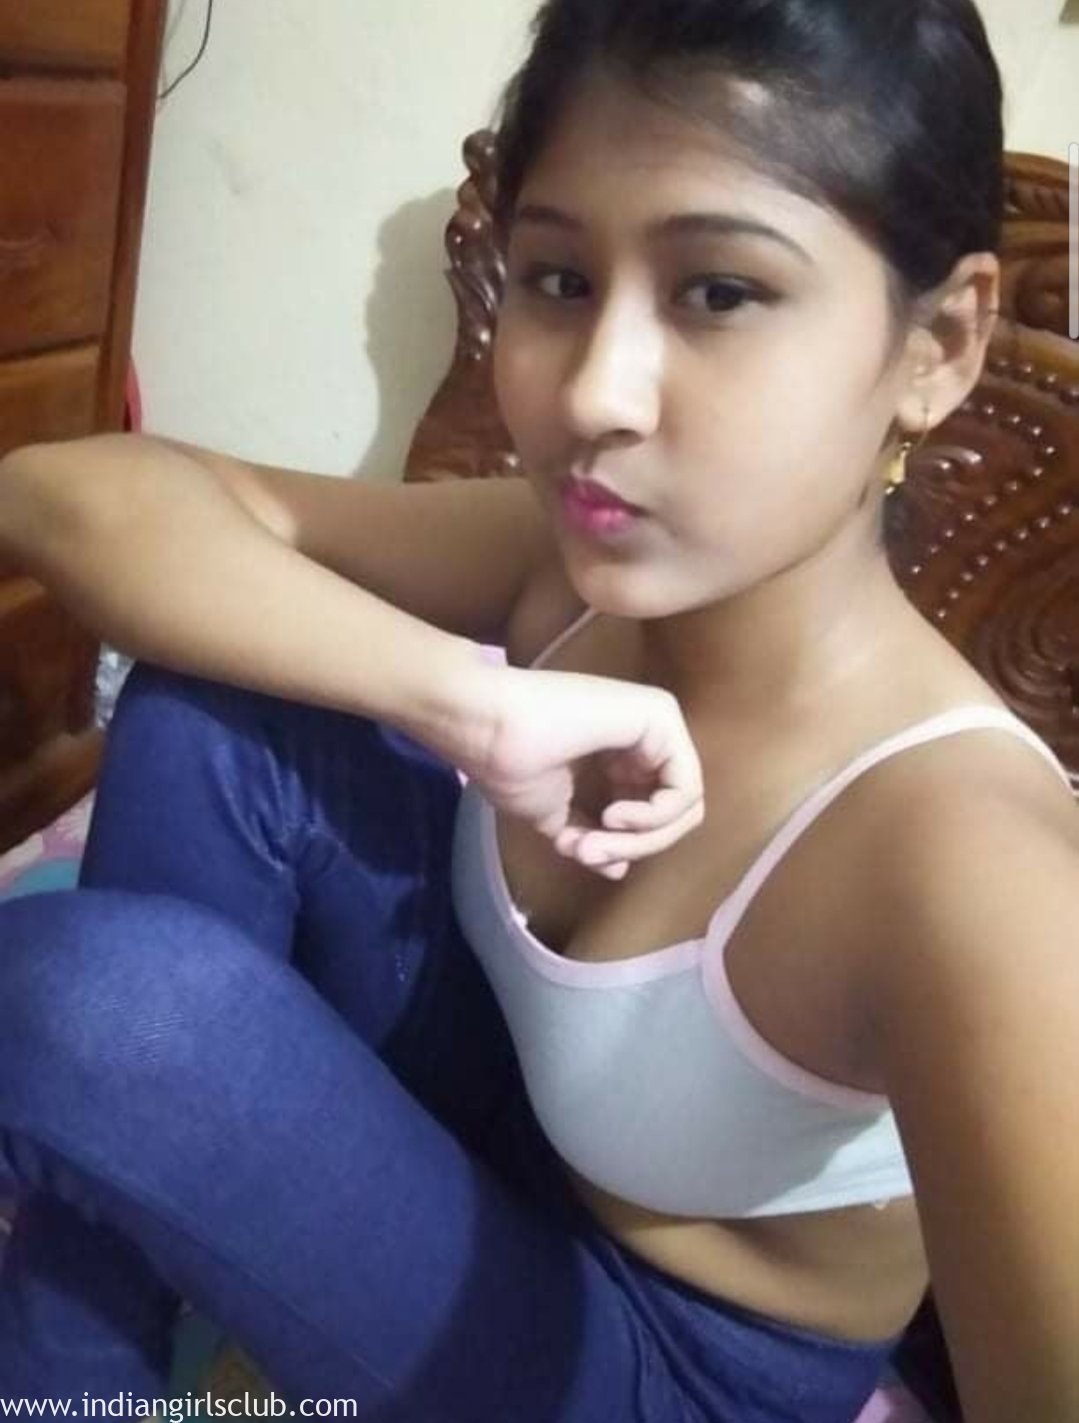 18-years-old-juicy-indian-school-teen-8 - Indian Girls Club - Nude Indian  Girls & Hot Sexy Indian Babes